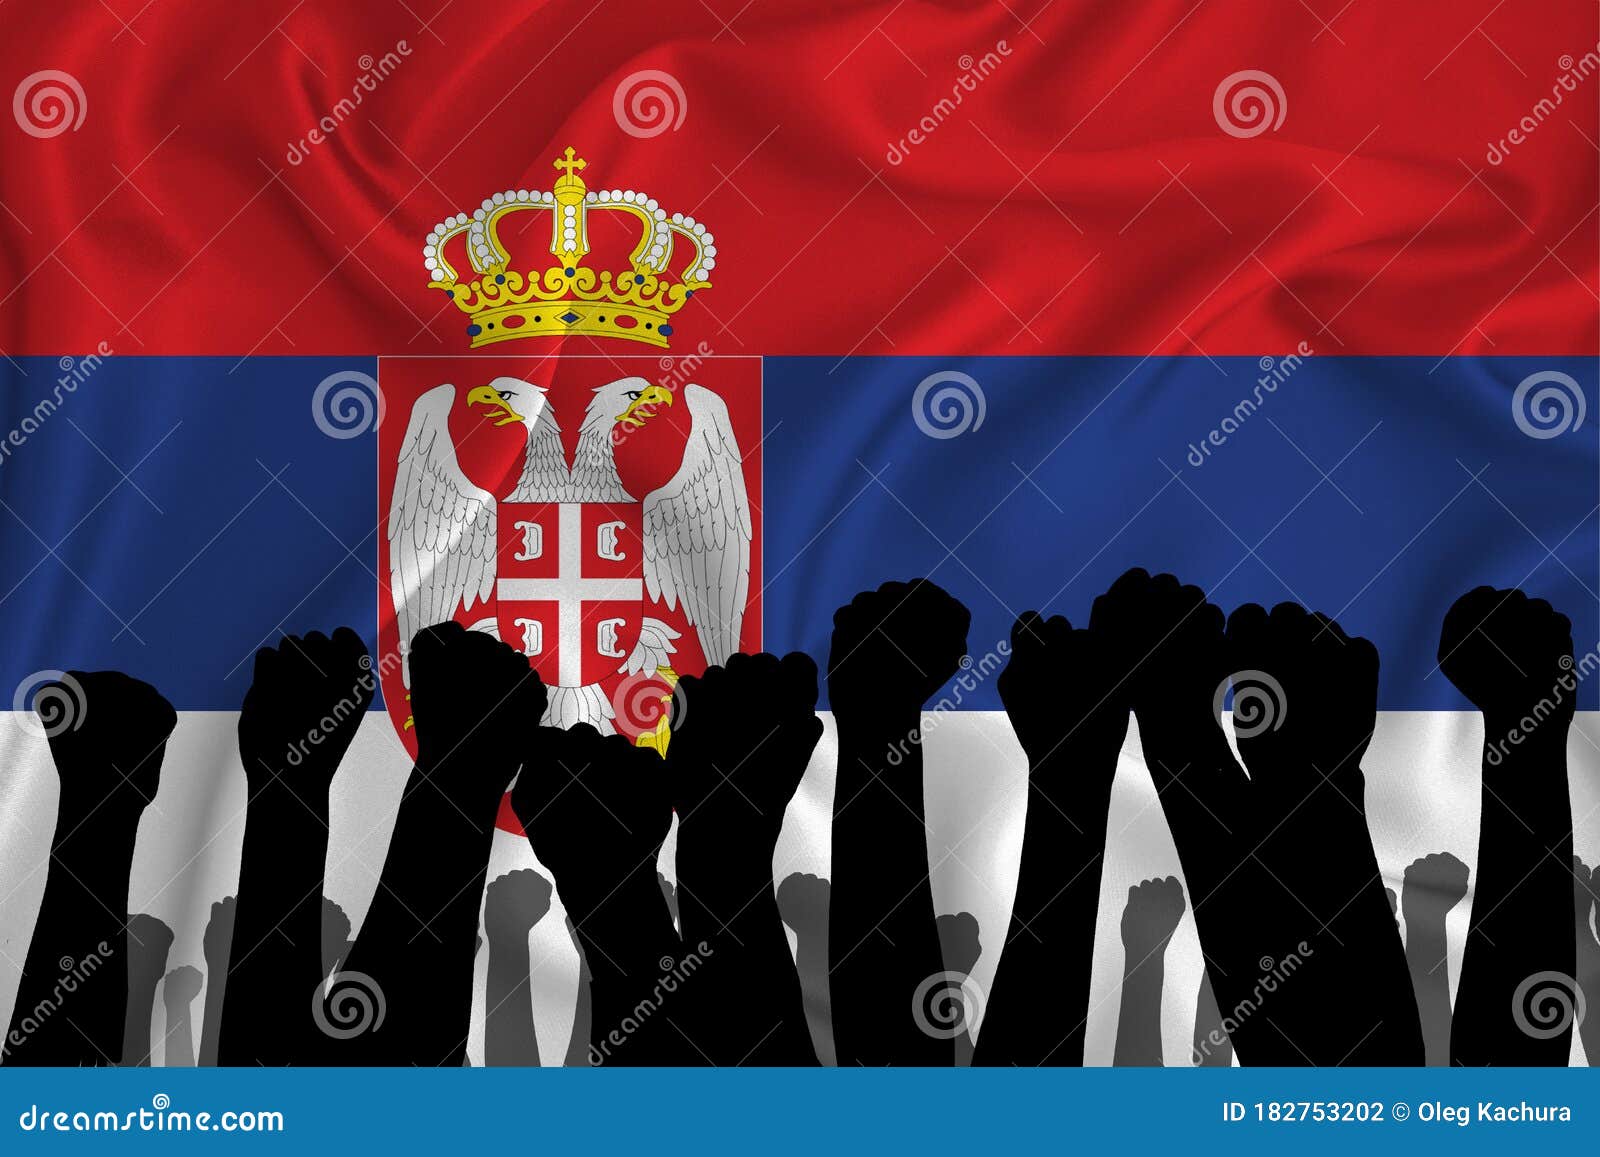 Silhouette of raised arms and clenched fists on the background of the flag of Serbian. The concept of power, conflict. With place for your text. 3D rendering.